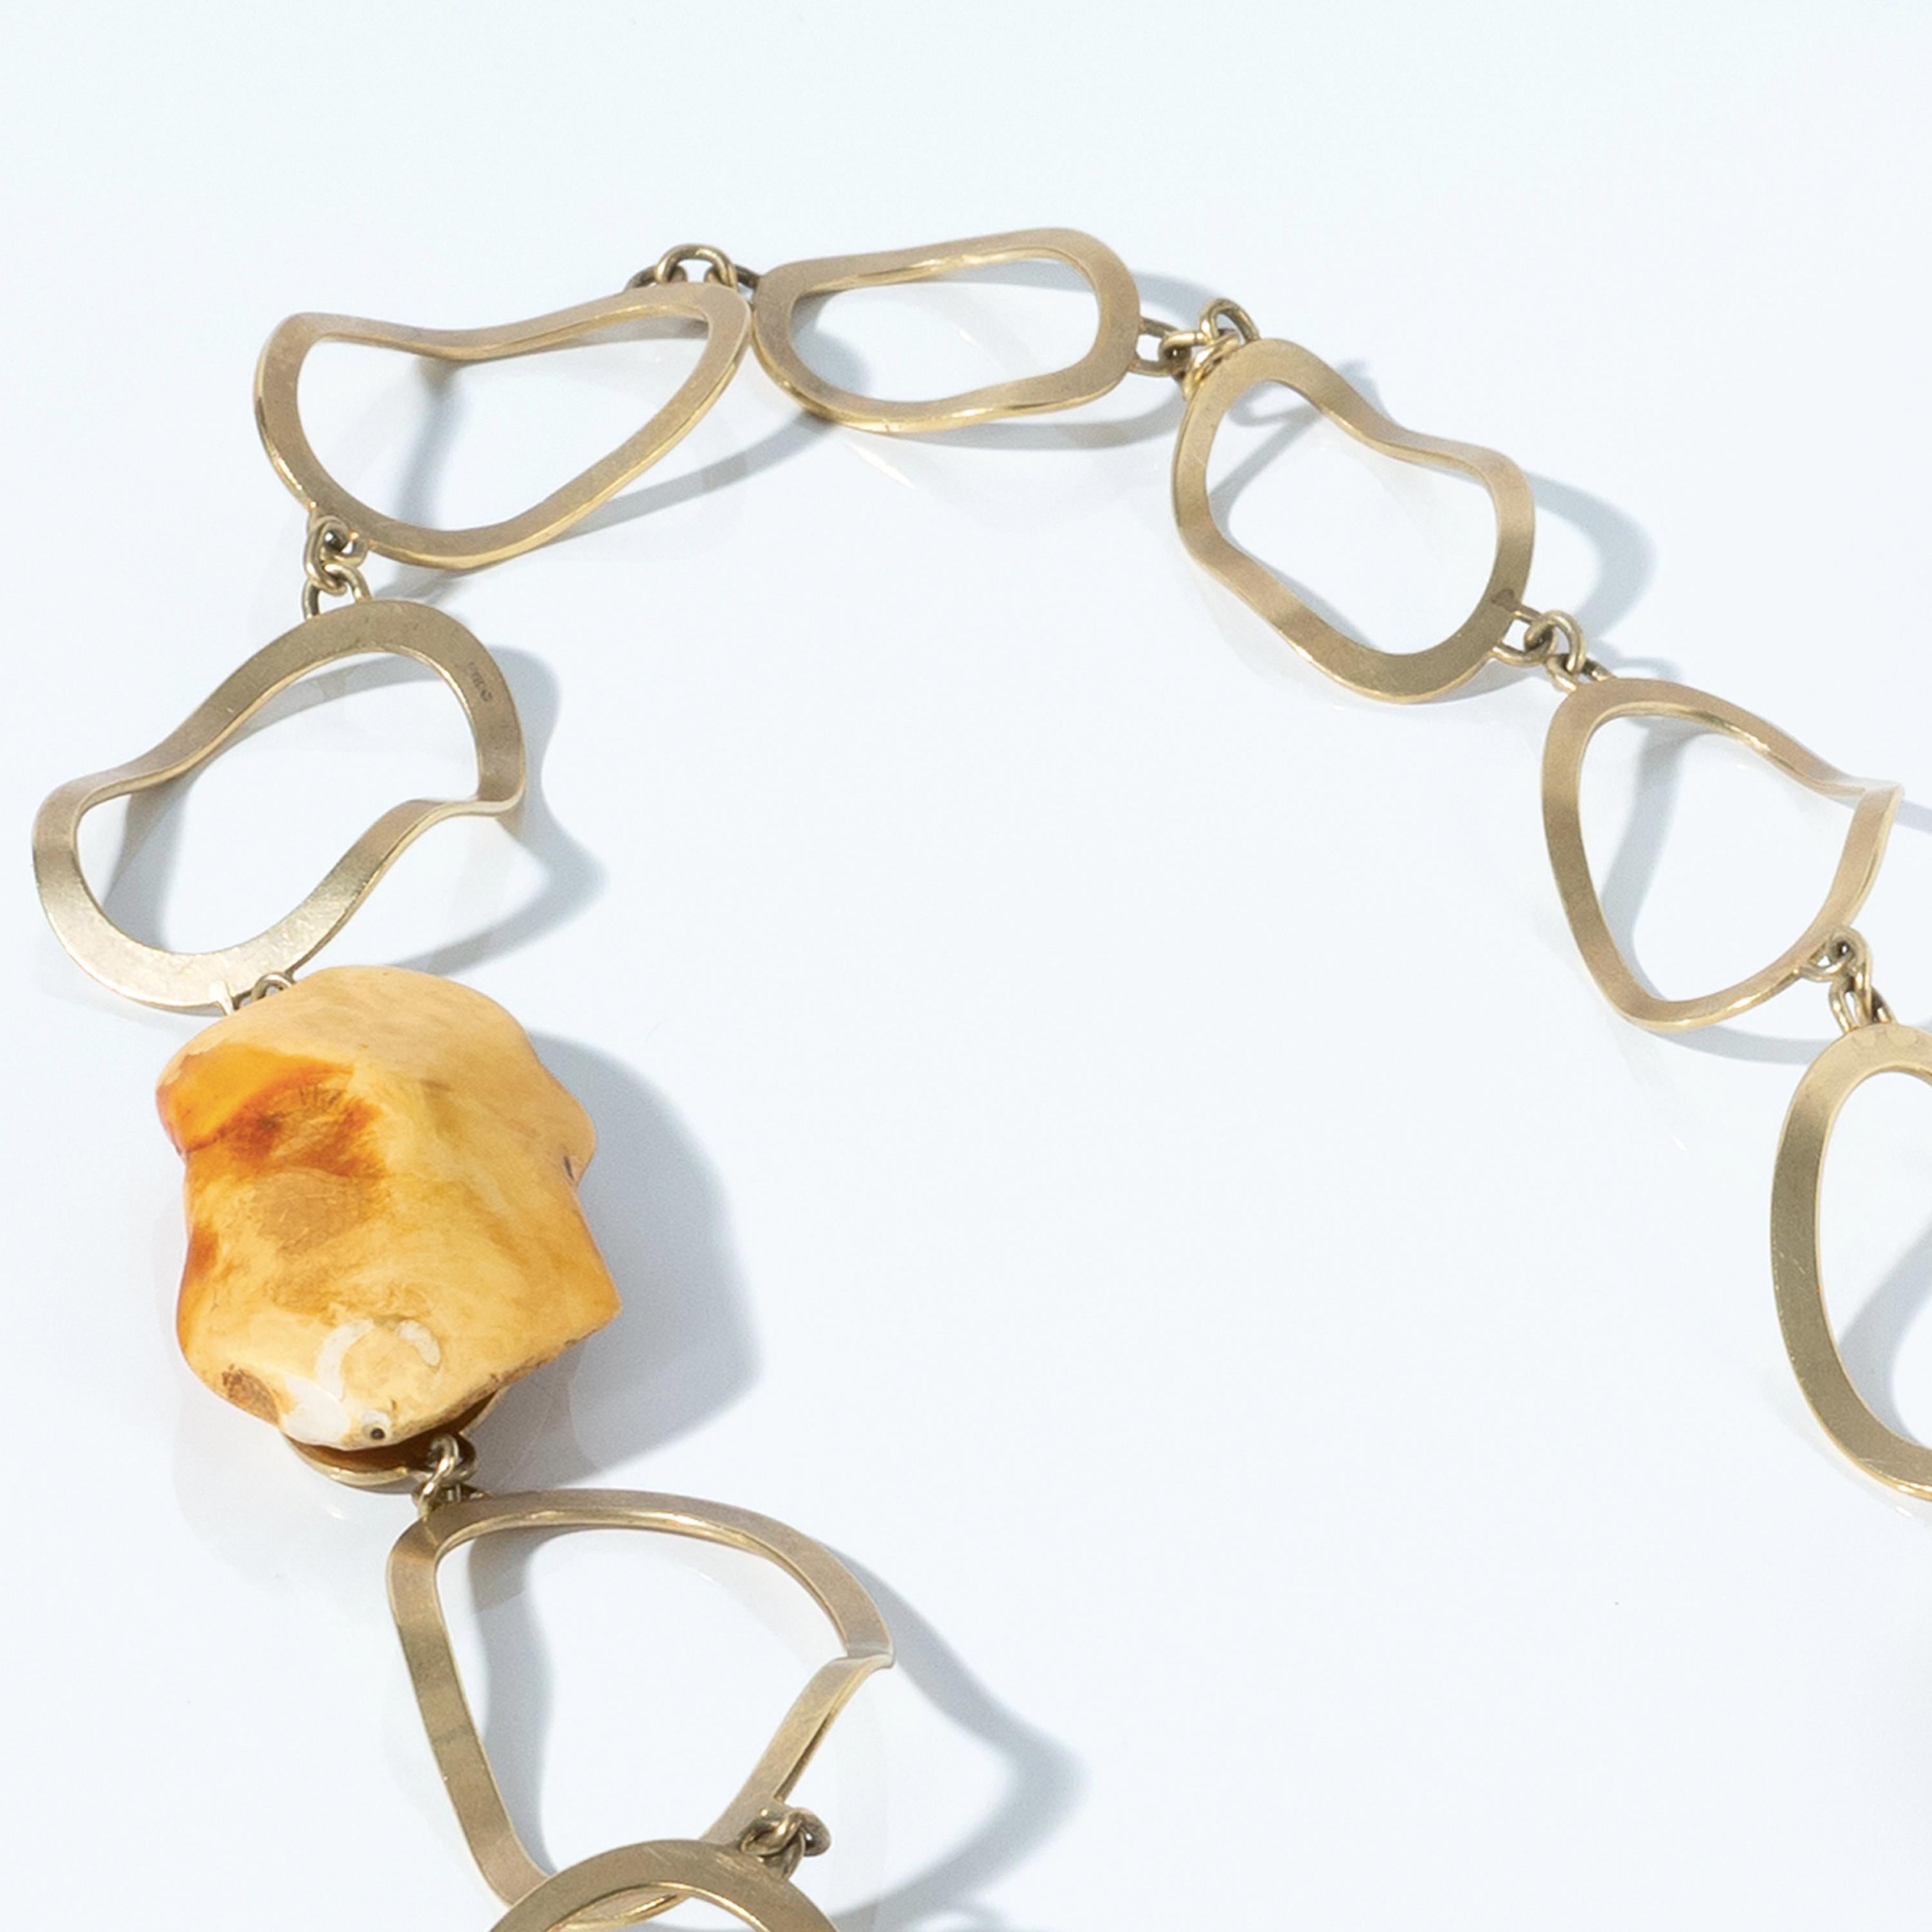 Artist Nan Nan Liu was asked by Mimi Lipton to create this one-of-a-kind piece of jewellery. Hand made links of 22 karat gold, reflect the cut of pieces of white amber from Estonia, in the Baltic region. Their rough form complimented by the